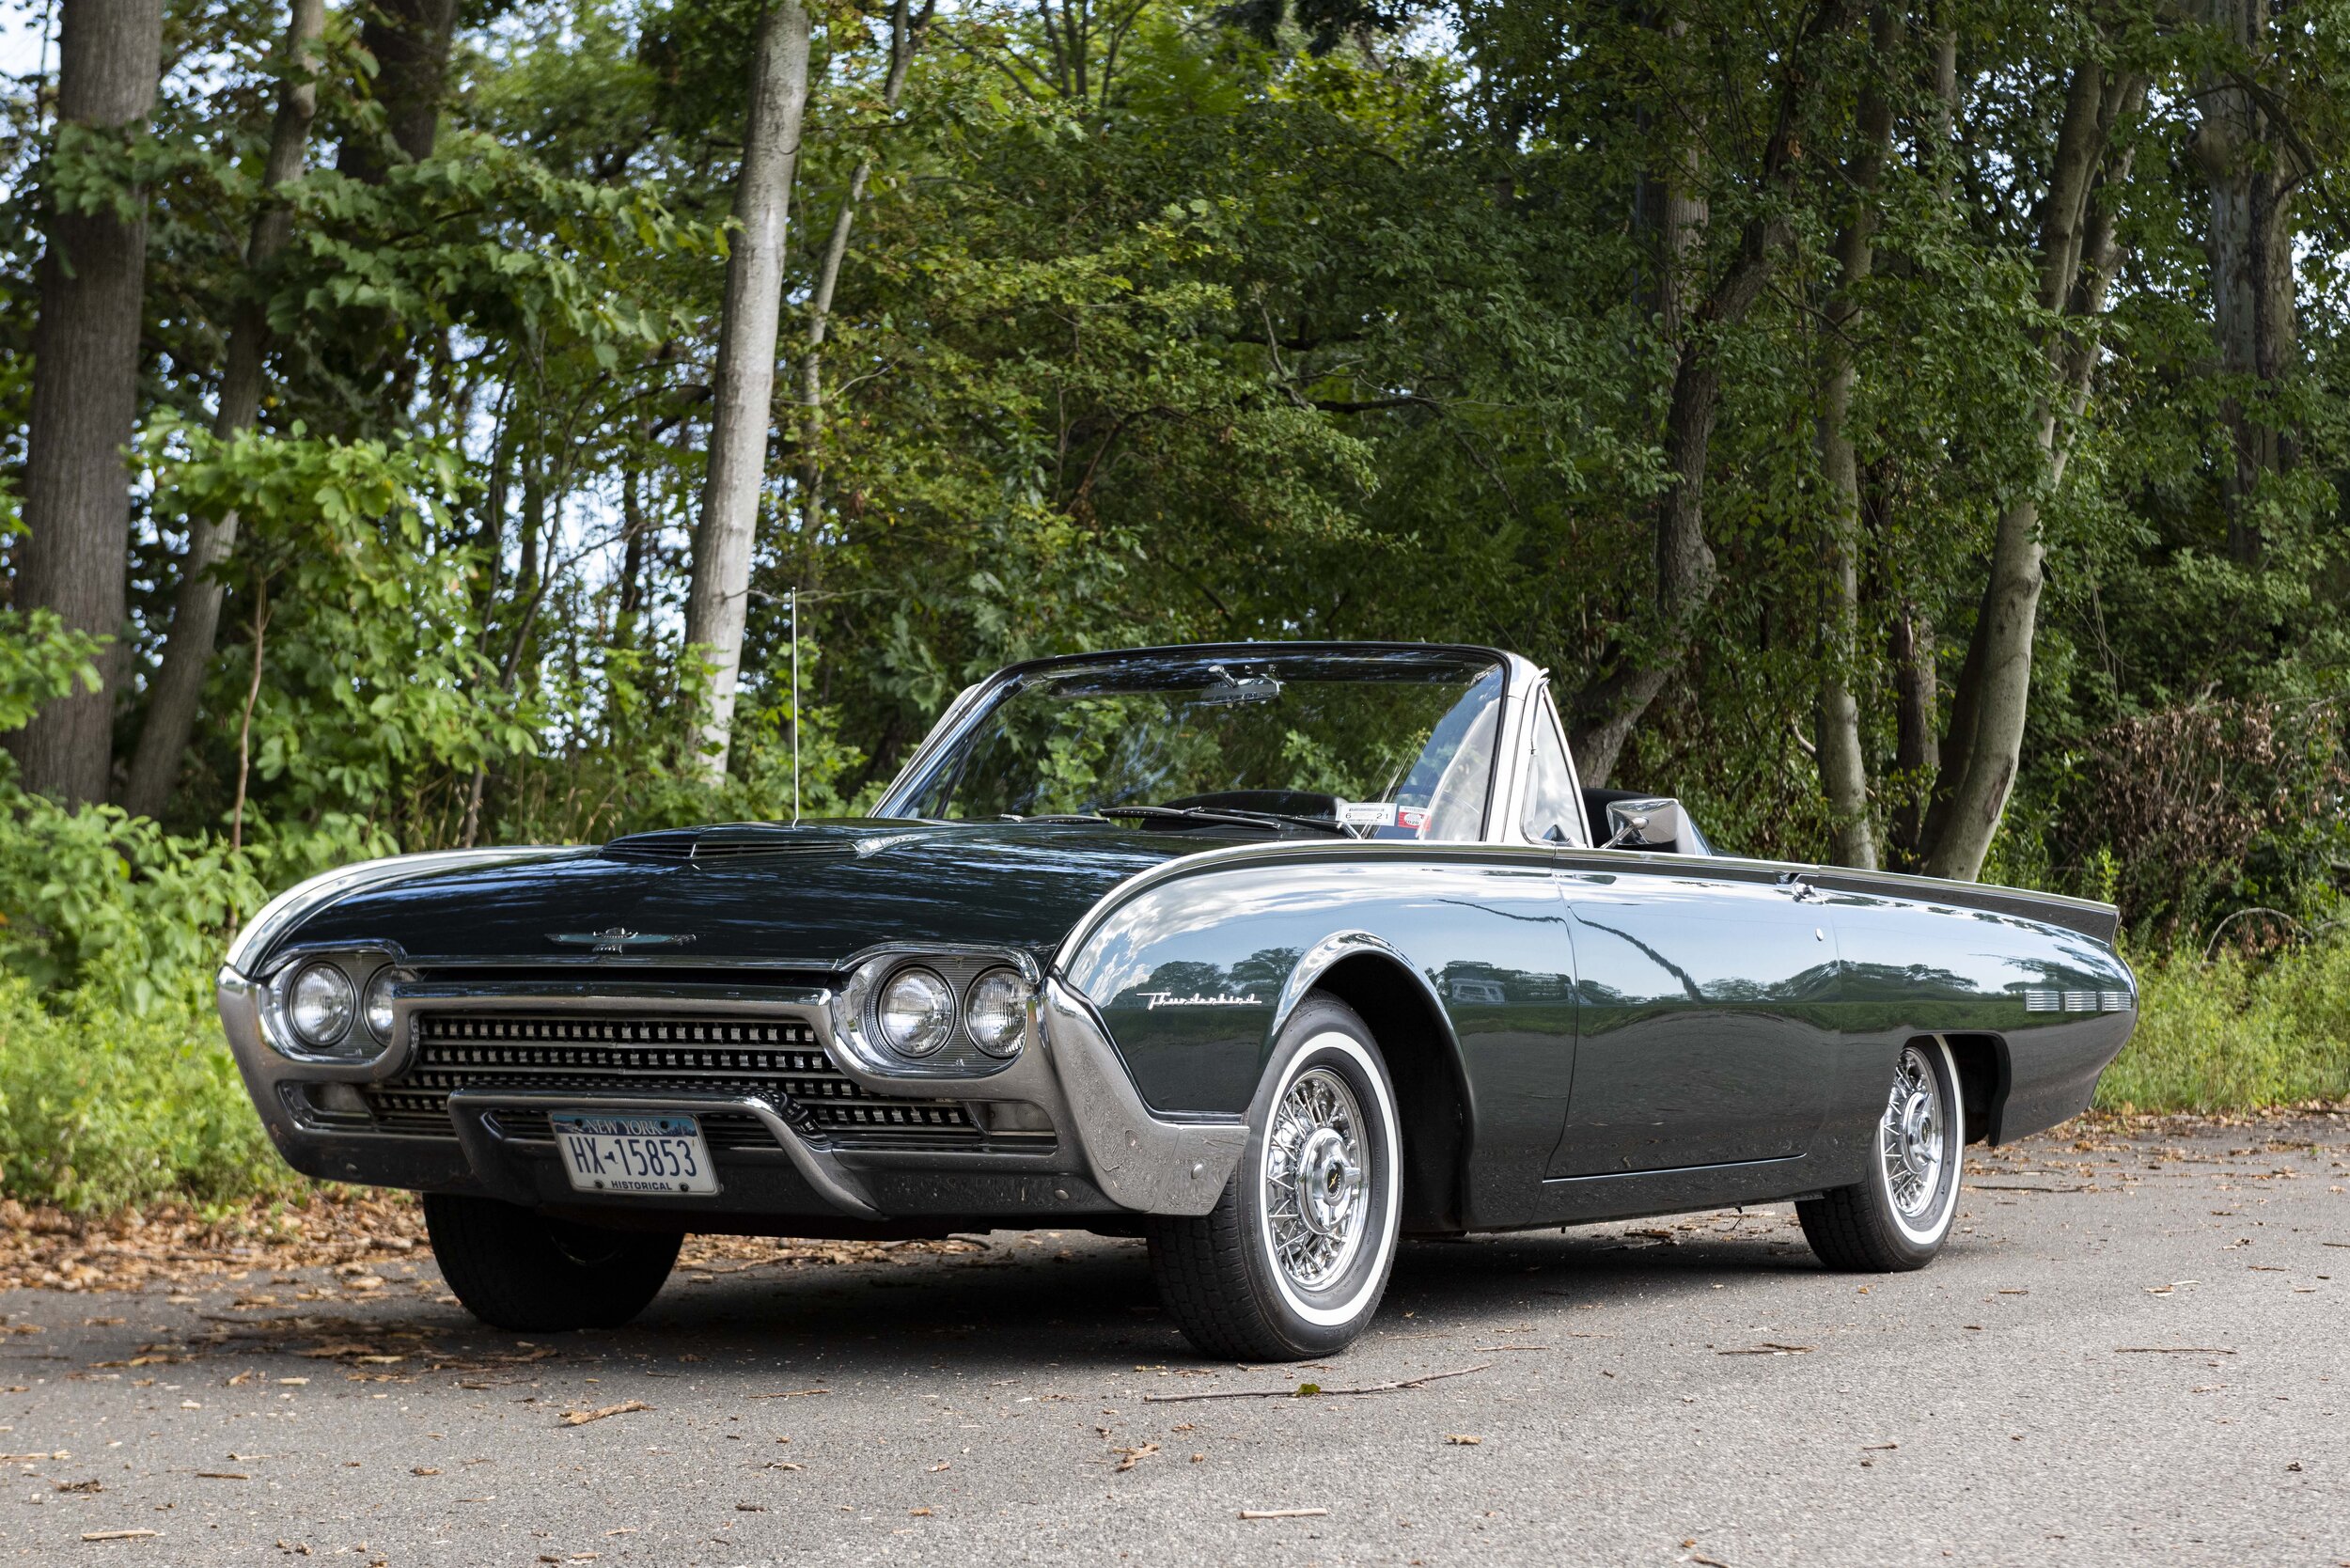 Factory Photo Ref. # 80361 1962 Ford Thunderbird Sports Roadster 